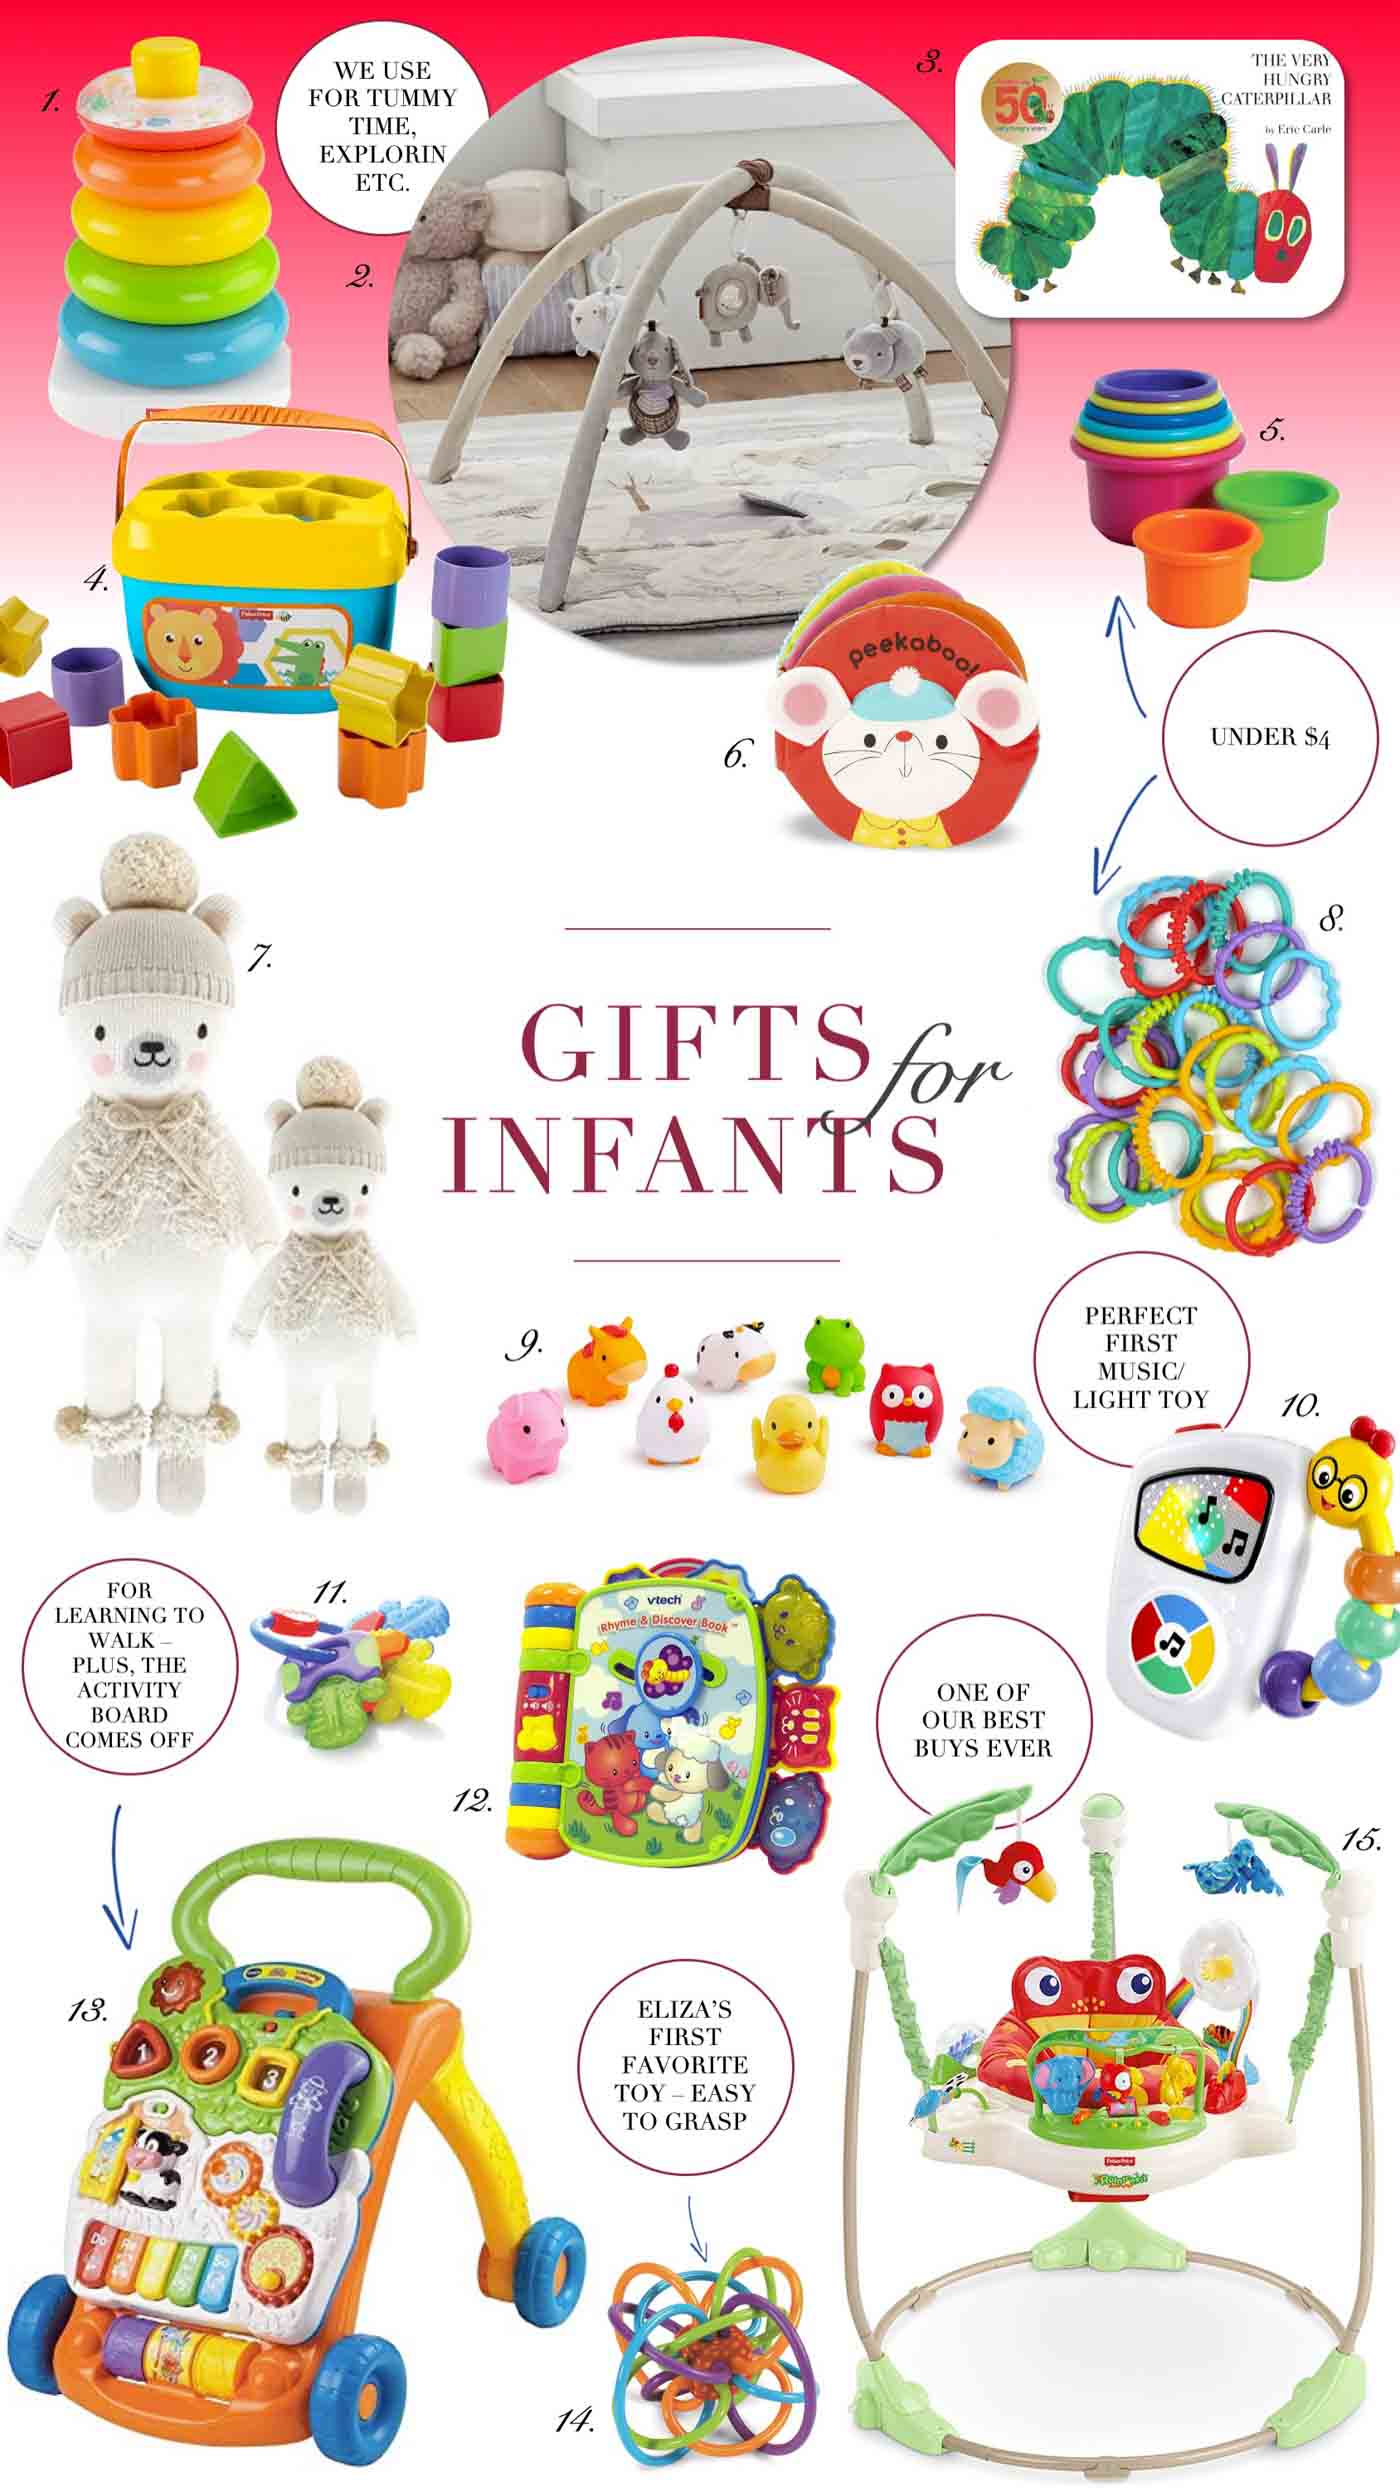 Christmas gift toy ideas for babies and infants